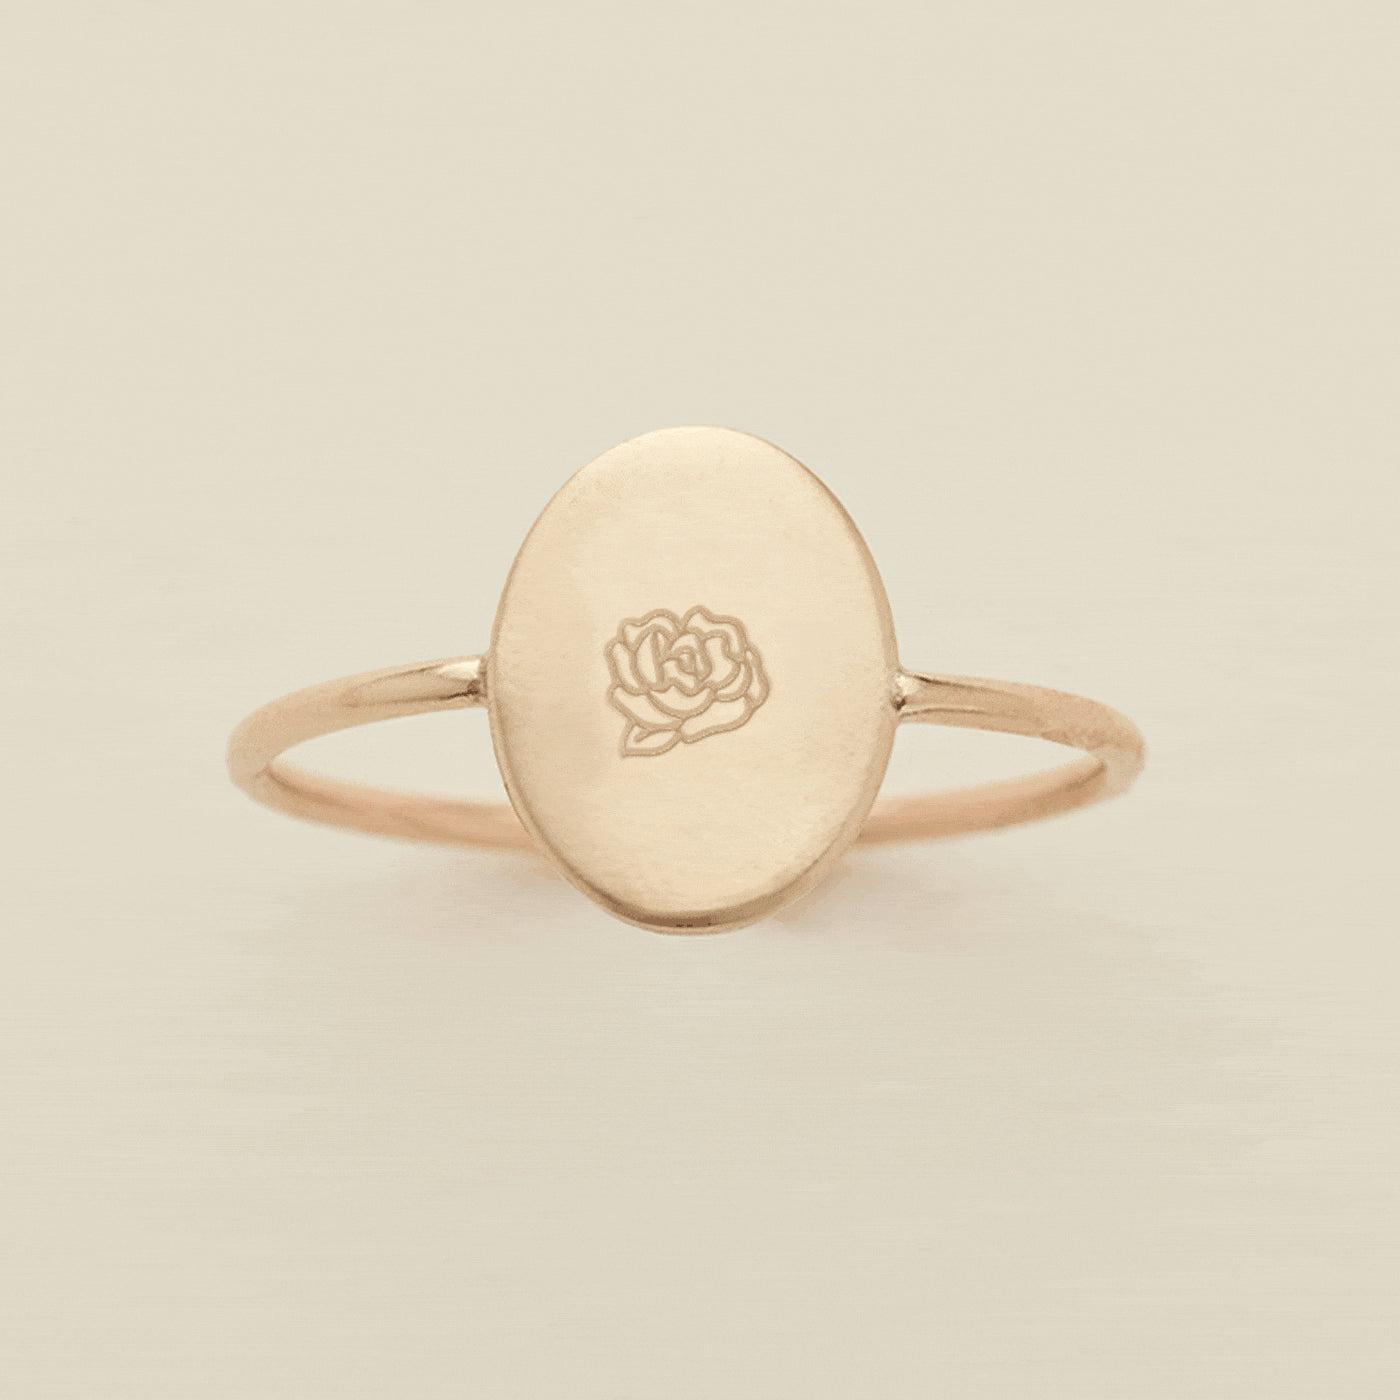 Oval Customized Ring - Initial or Birth Flower Gold Filled / 5 Ring